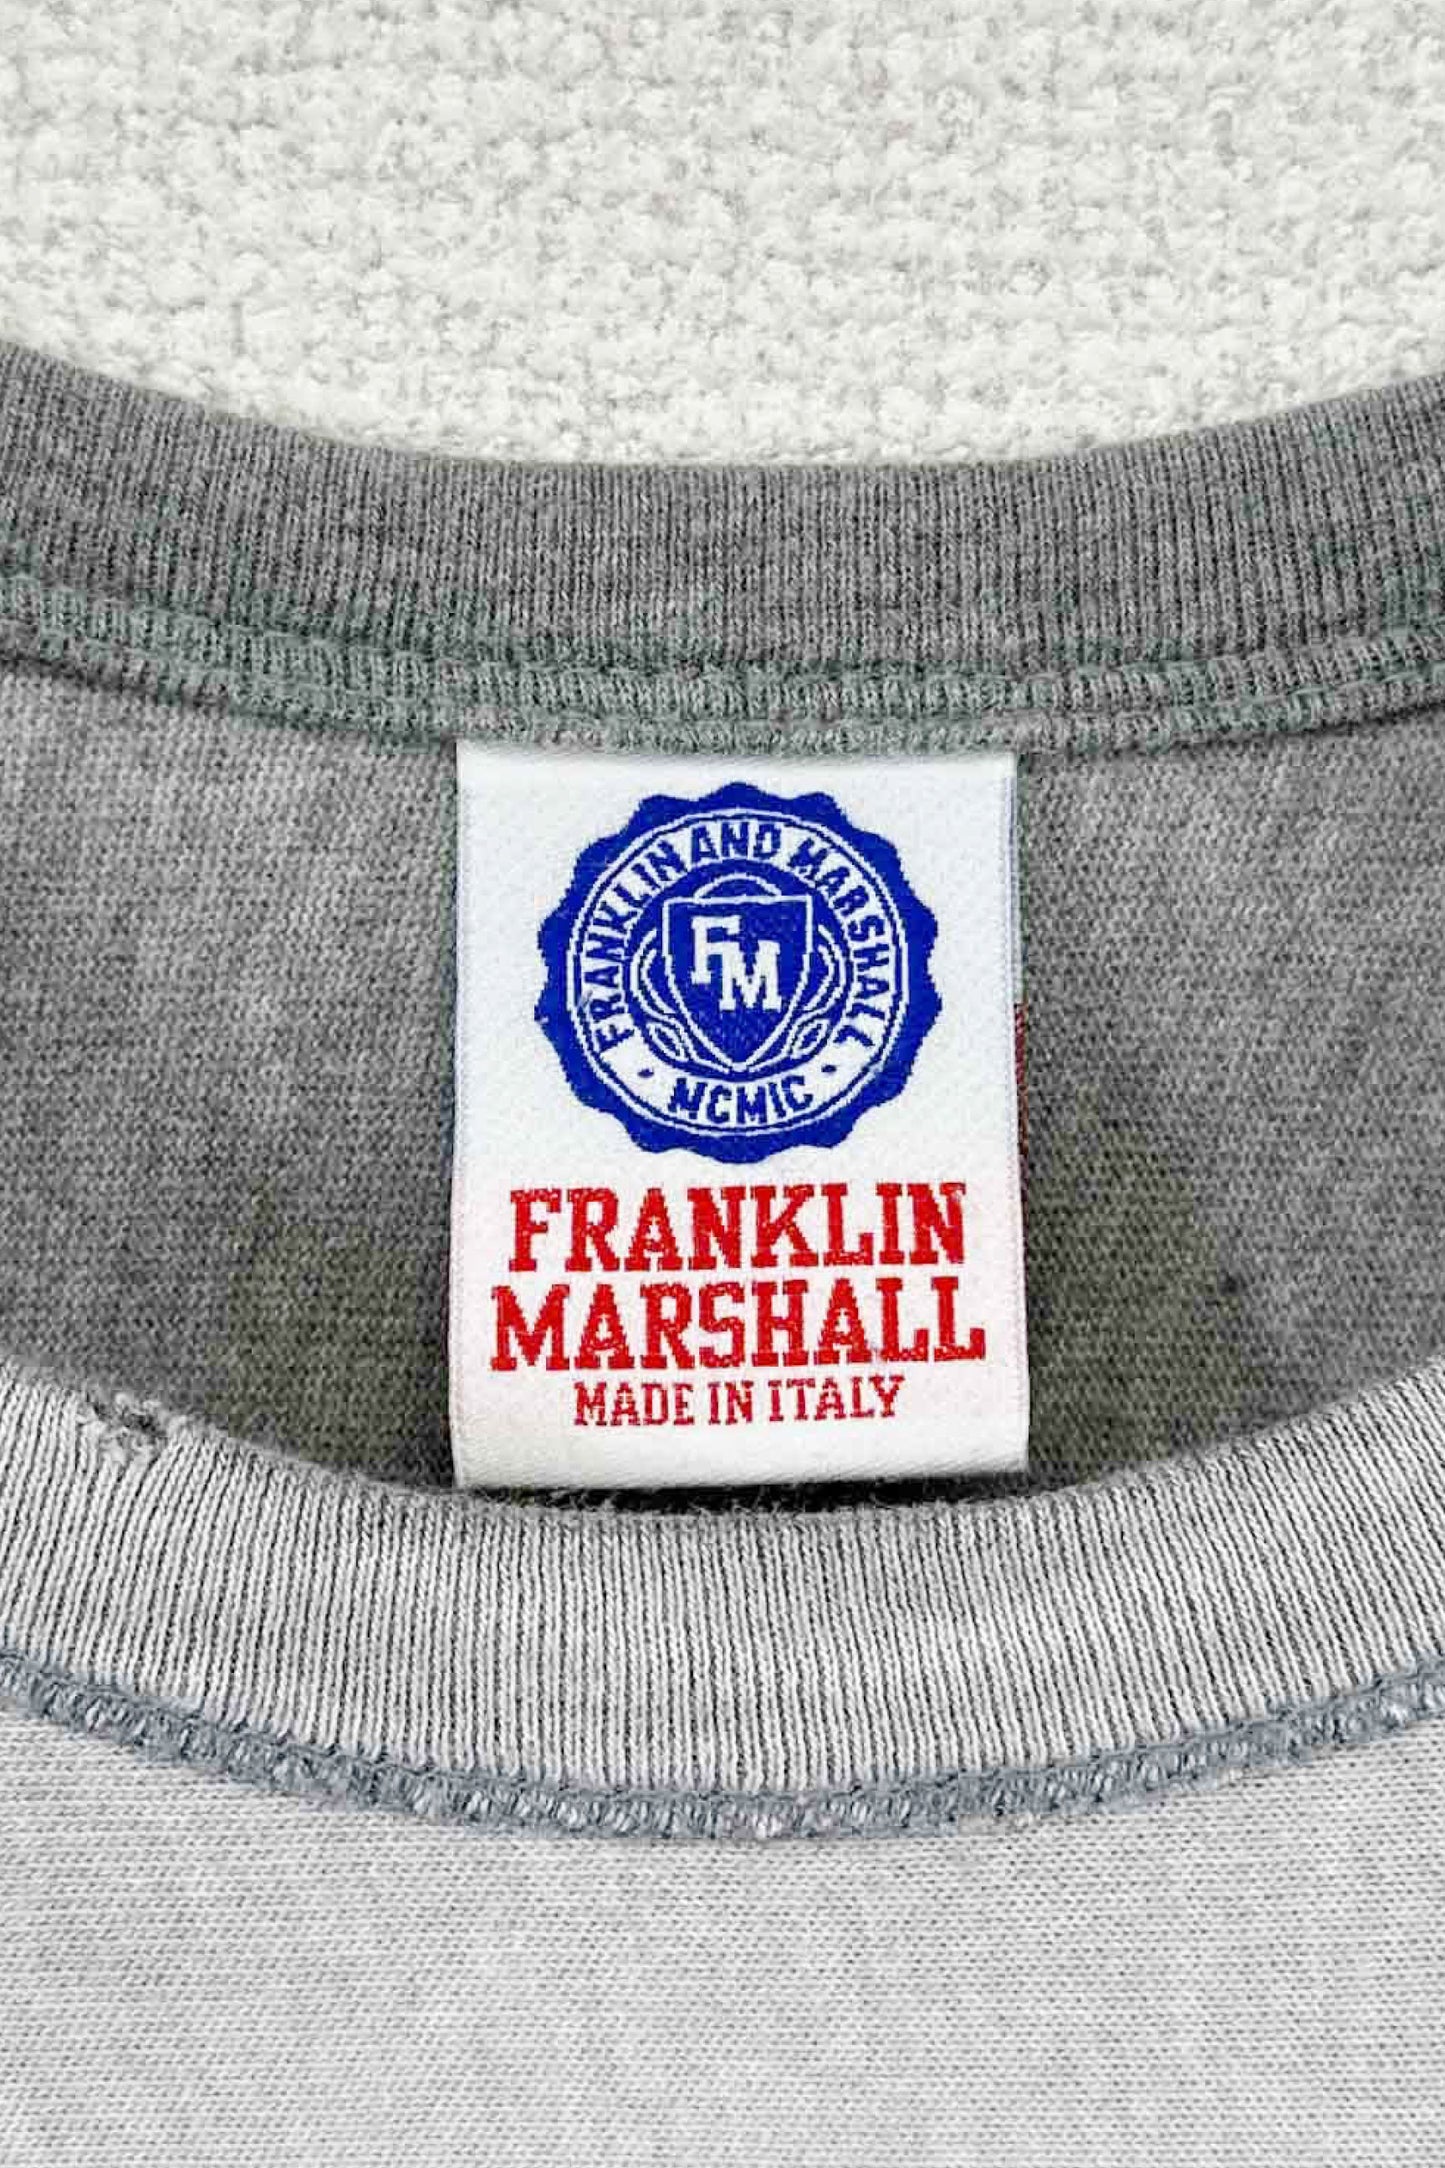 Made in ITALY FRANKLIN MARSHALL T-shirt